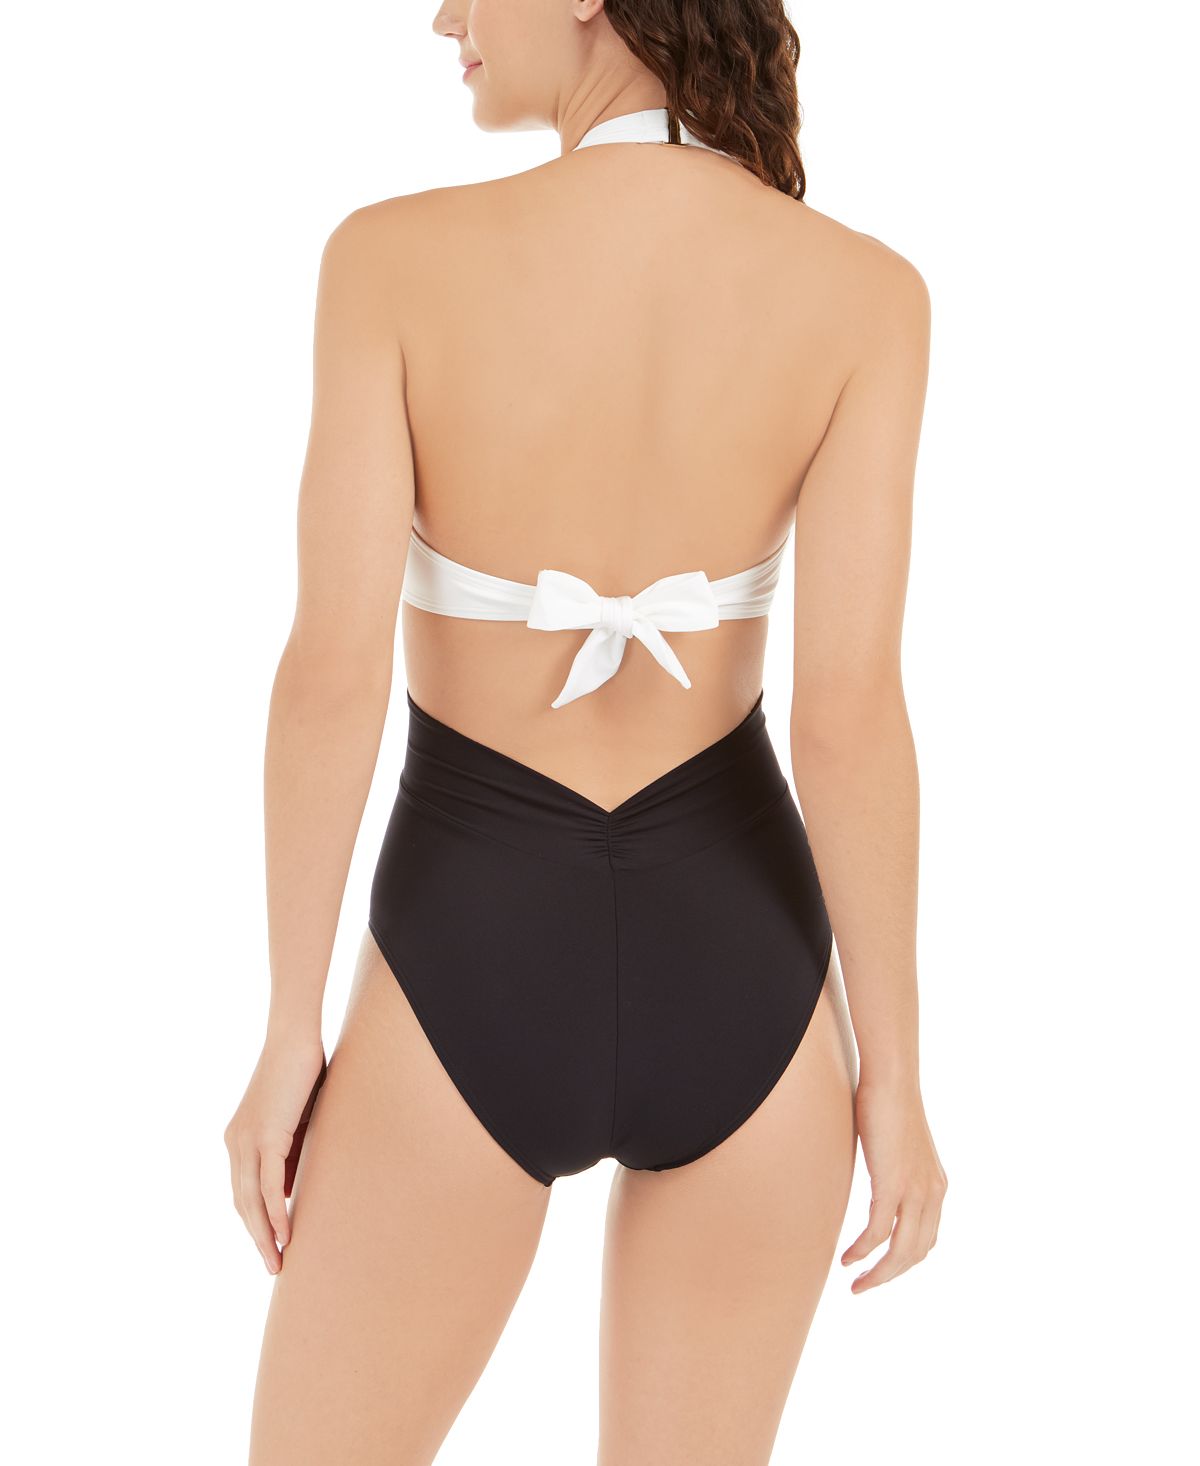 Kate Spade New York Twist Front One-piece Swimsuit Black/White